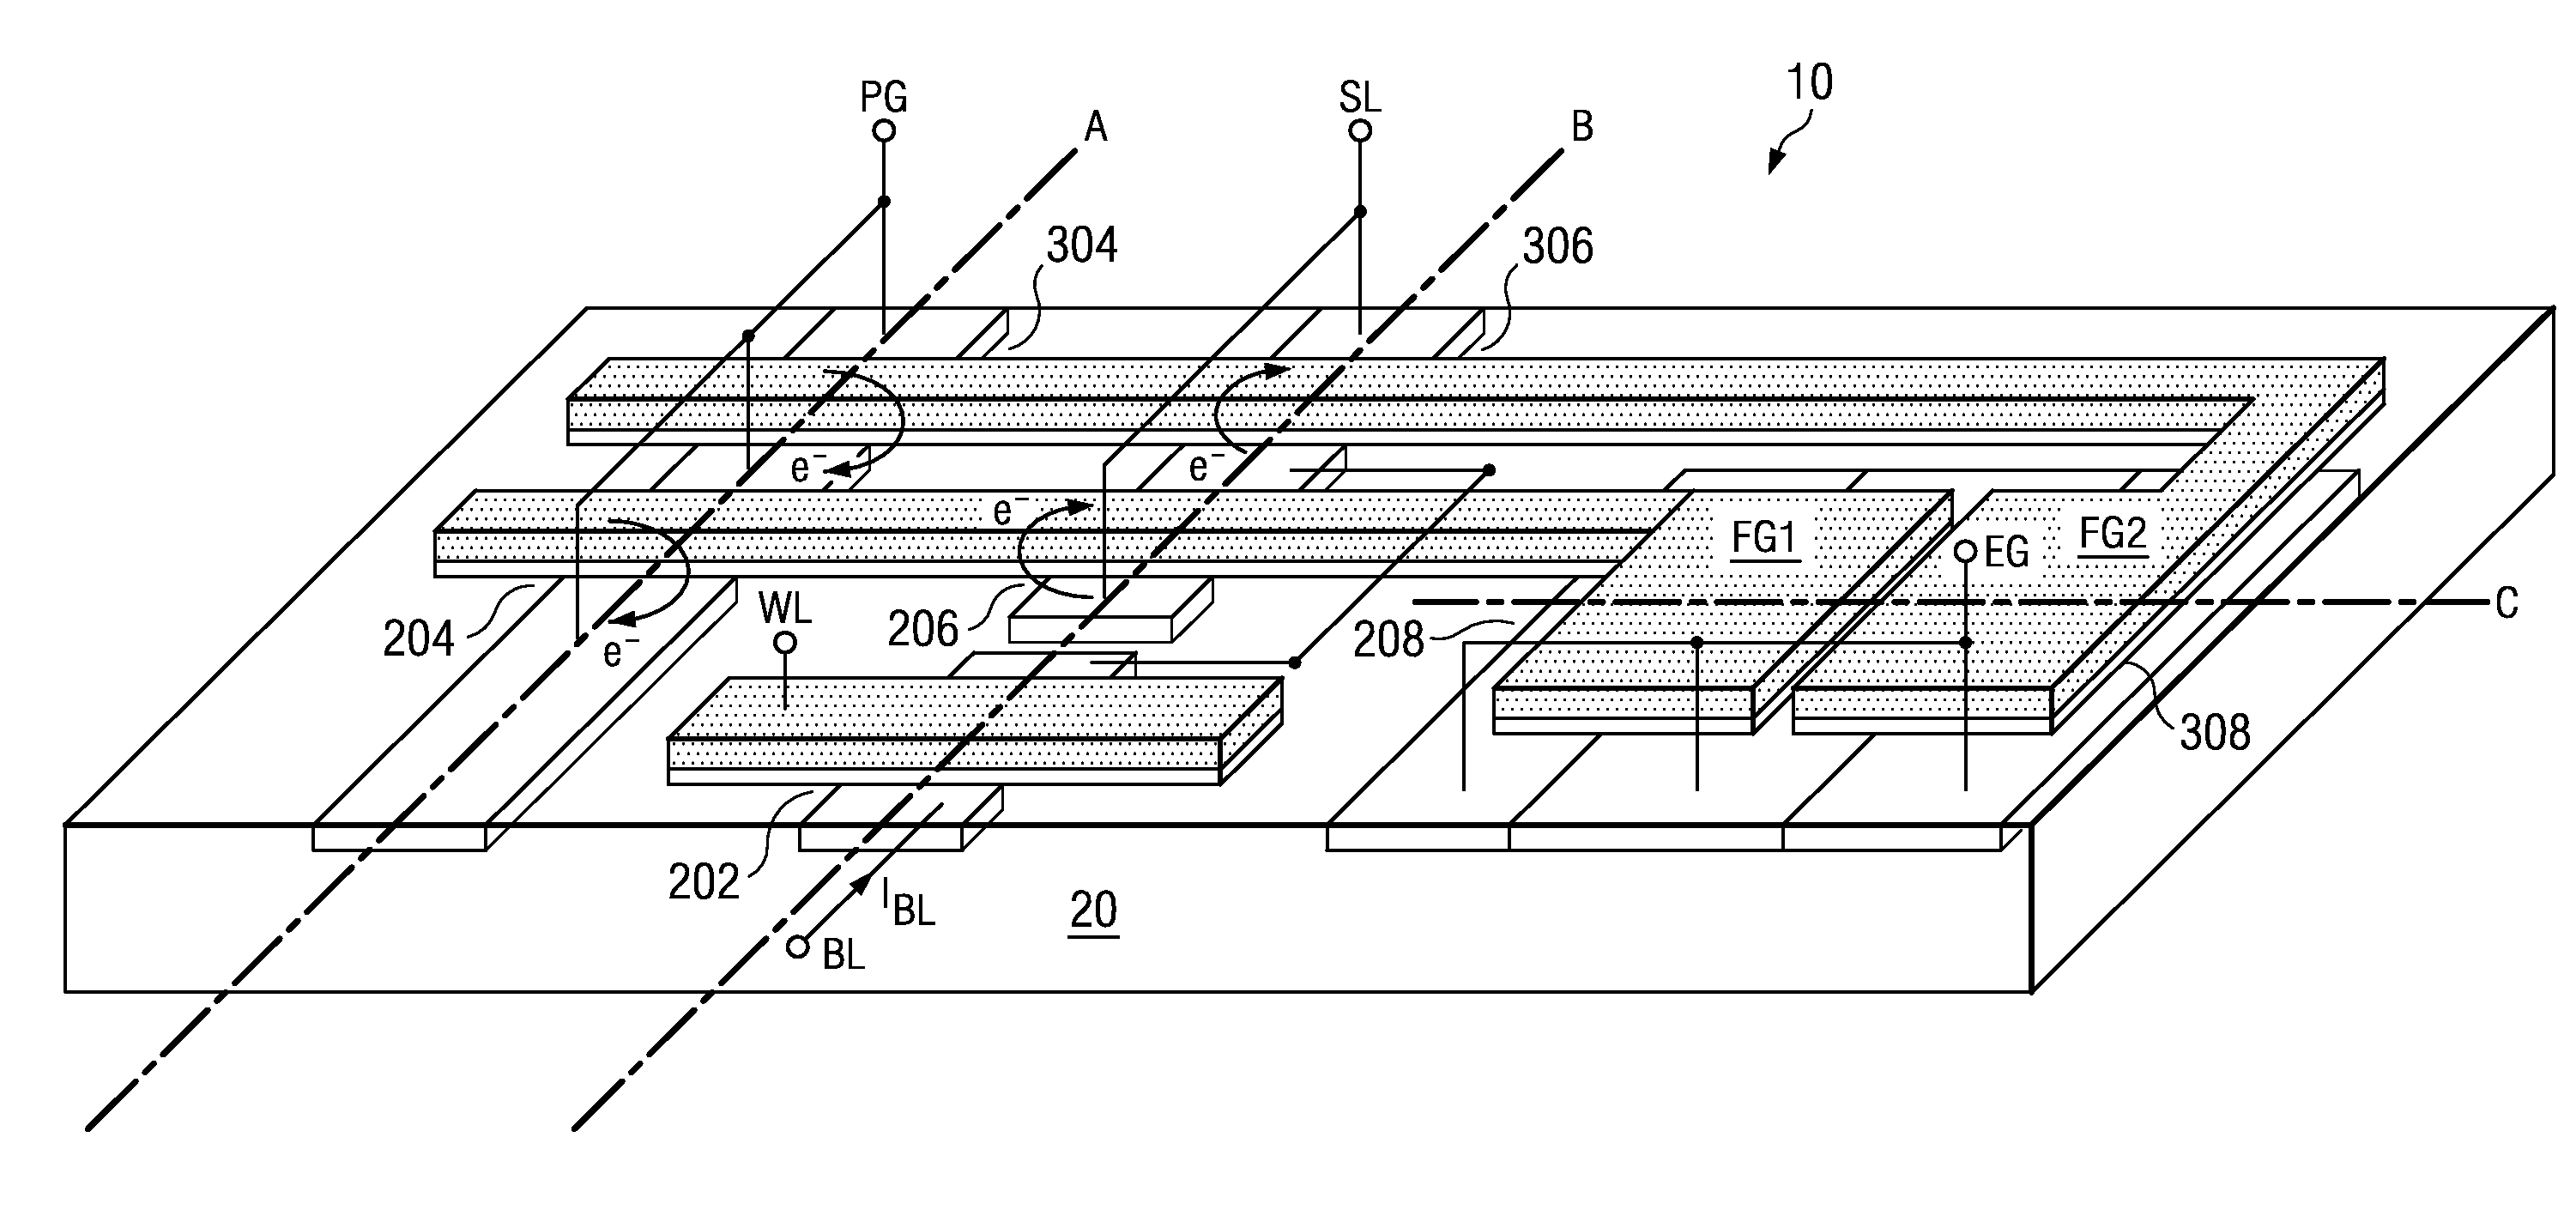 Logic non-volatile memory cell with improved data retention ability